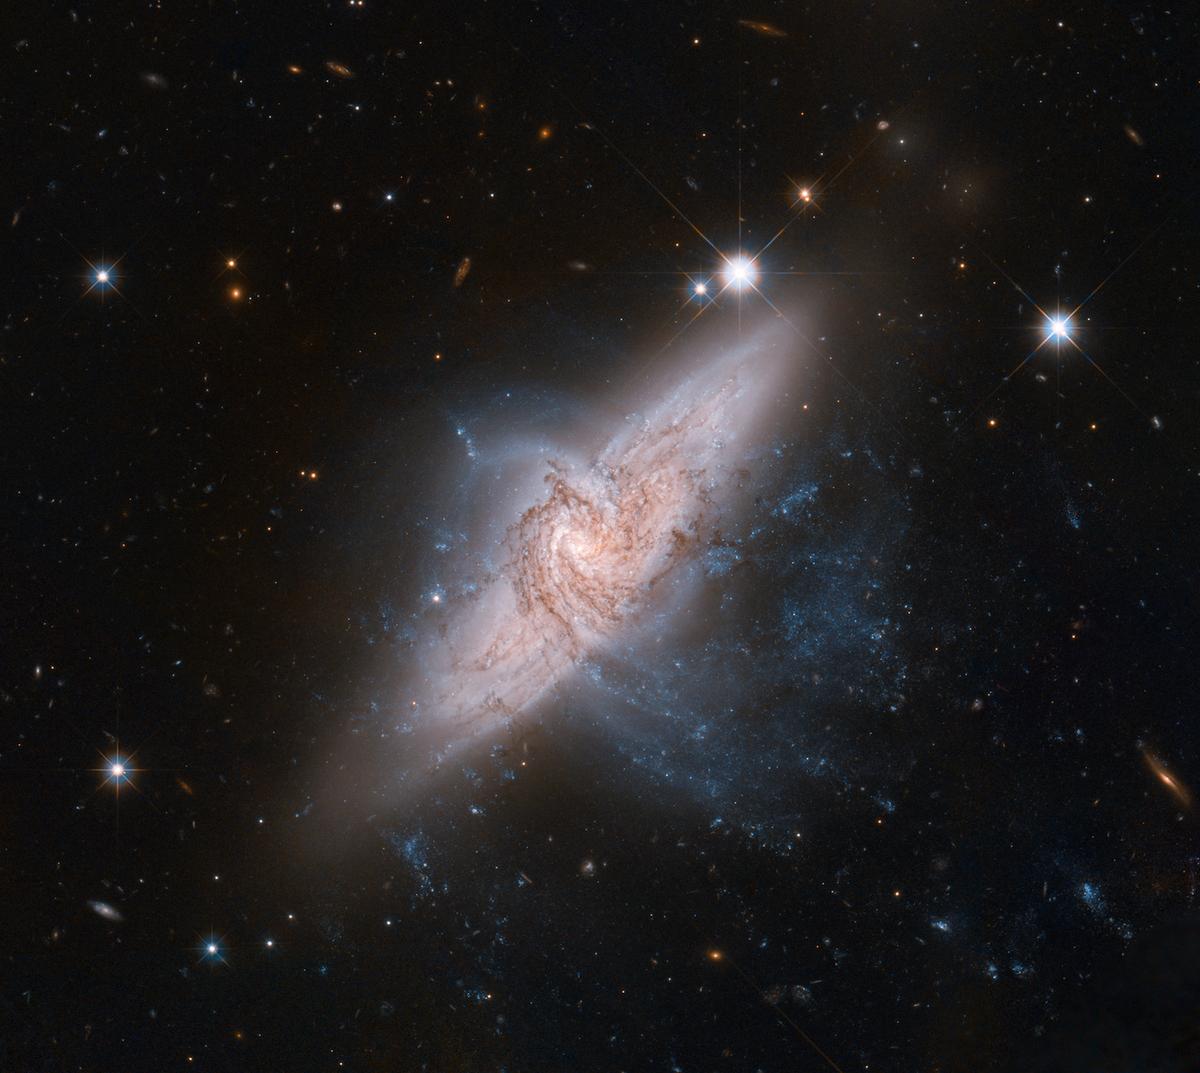 The NASA/ESA Hubble Space Telescope in June 2012 produced an incredibly detailed image of a pair of overlapping galaxies called NGC 3314, which although appearing to collide are actually tens of millions of light-years apart. (Courtesy of NASA, ESA, the Hubble Heritage (STScI/AURA)-<a href="https://esahubble.org/images/heic1208a/">ESA/Hubble Collaboration</a>, and W. Keel (University of Alabama)/CC BY 4.0)